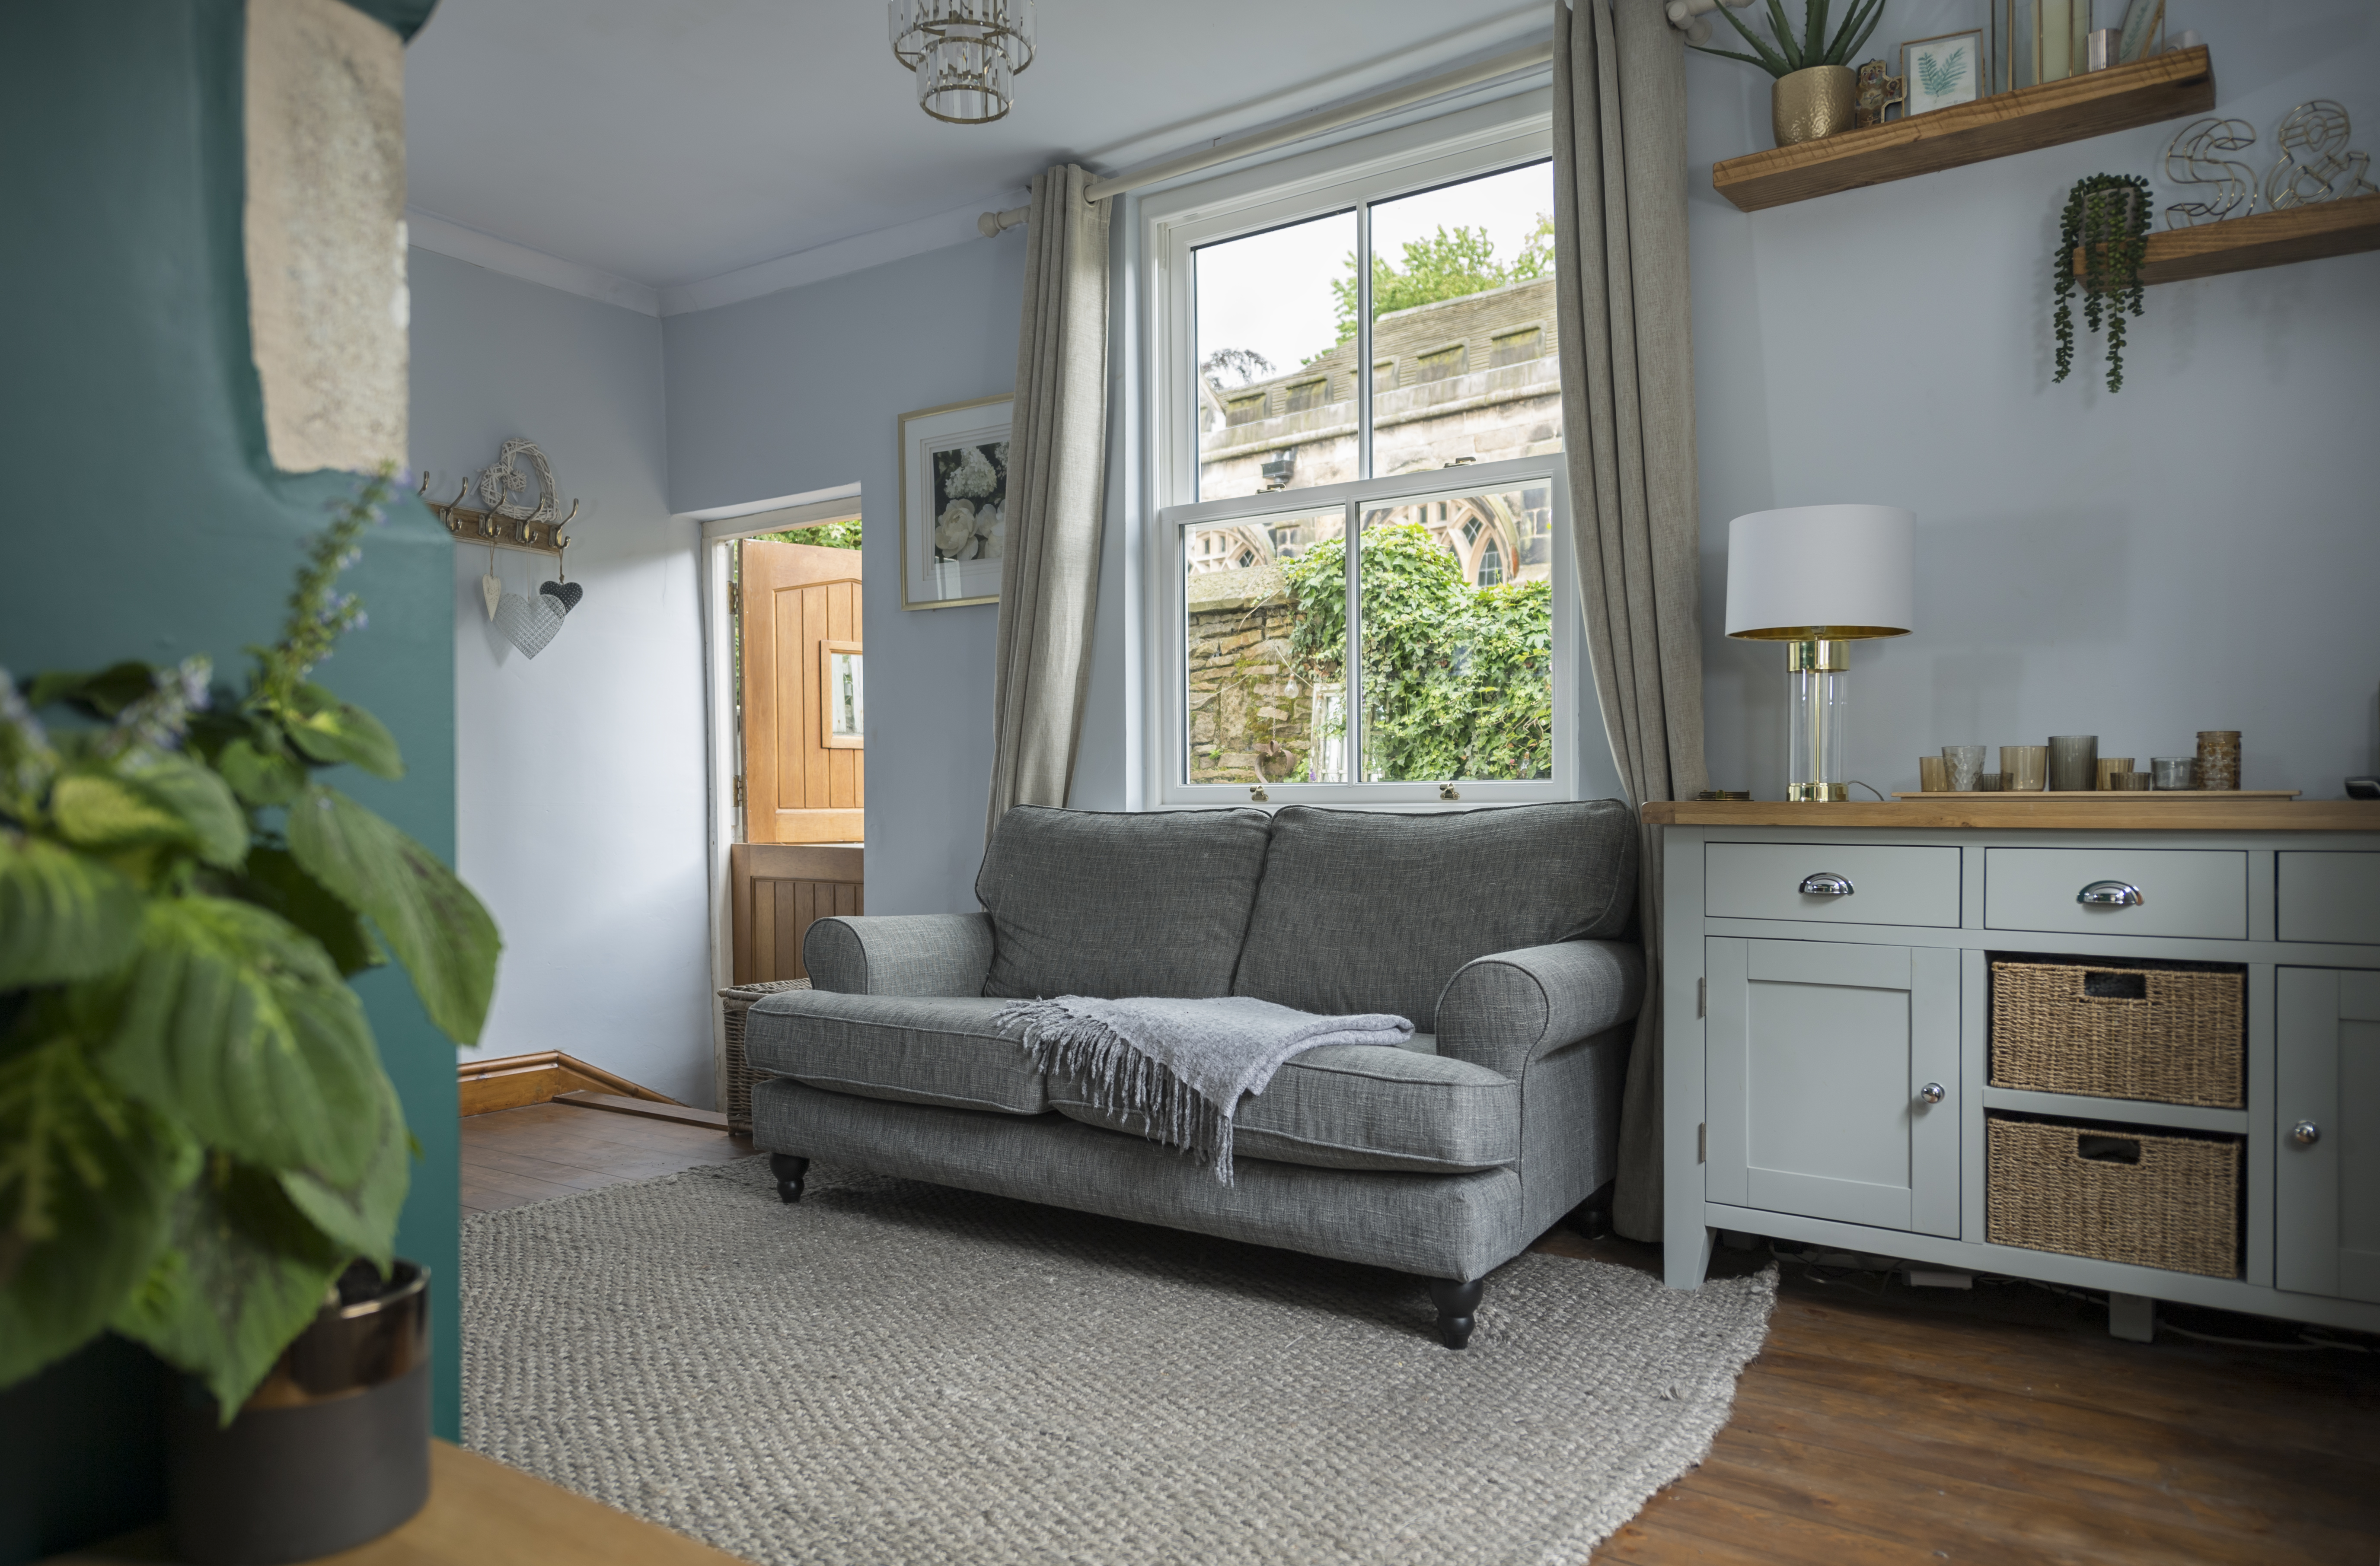 STYLE YOUR LIVING SPACE WITH THE TOP INTERIOR TRENDS THIS AUTUMN @AnglianHome